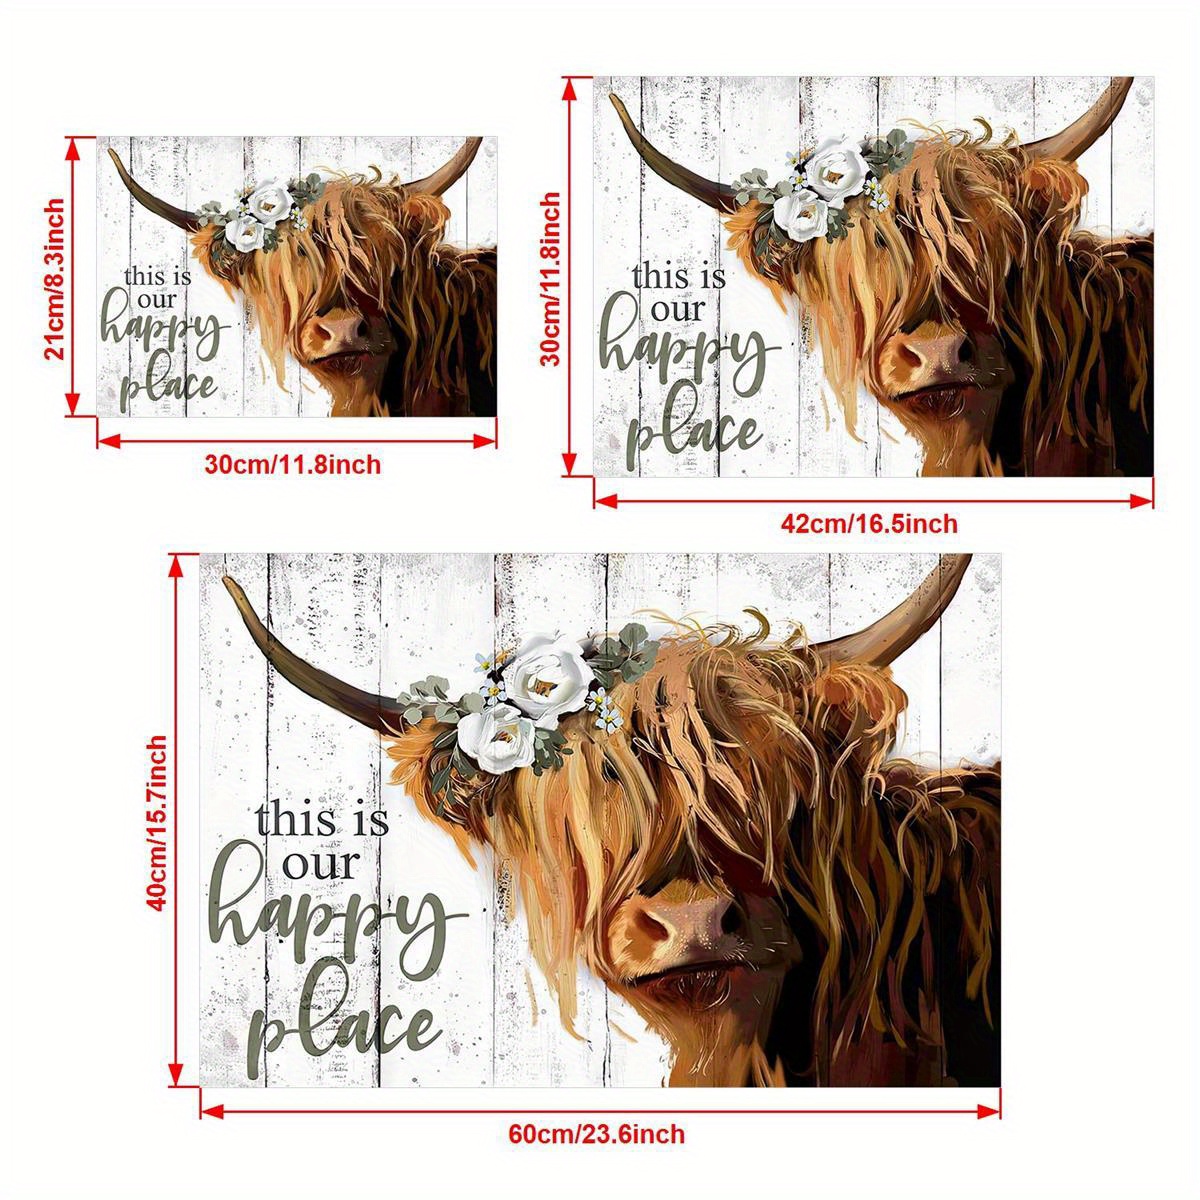 Highland Cow Wall Art - This Is Our Happy Place Inspirational